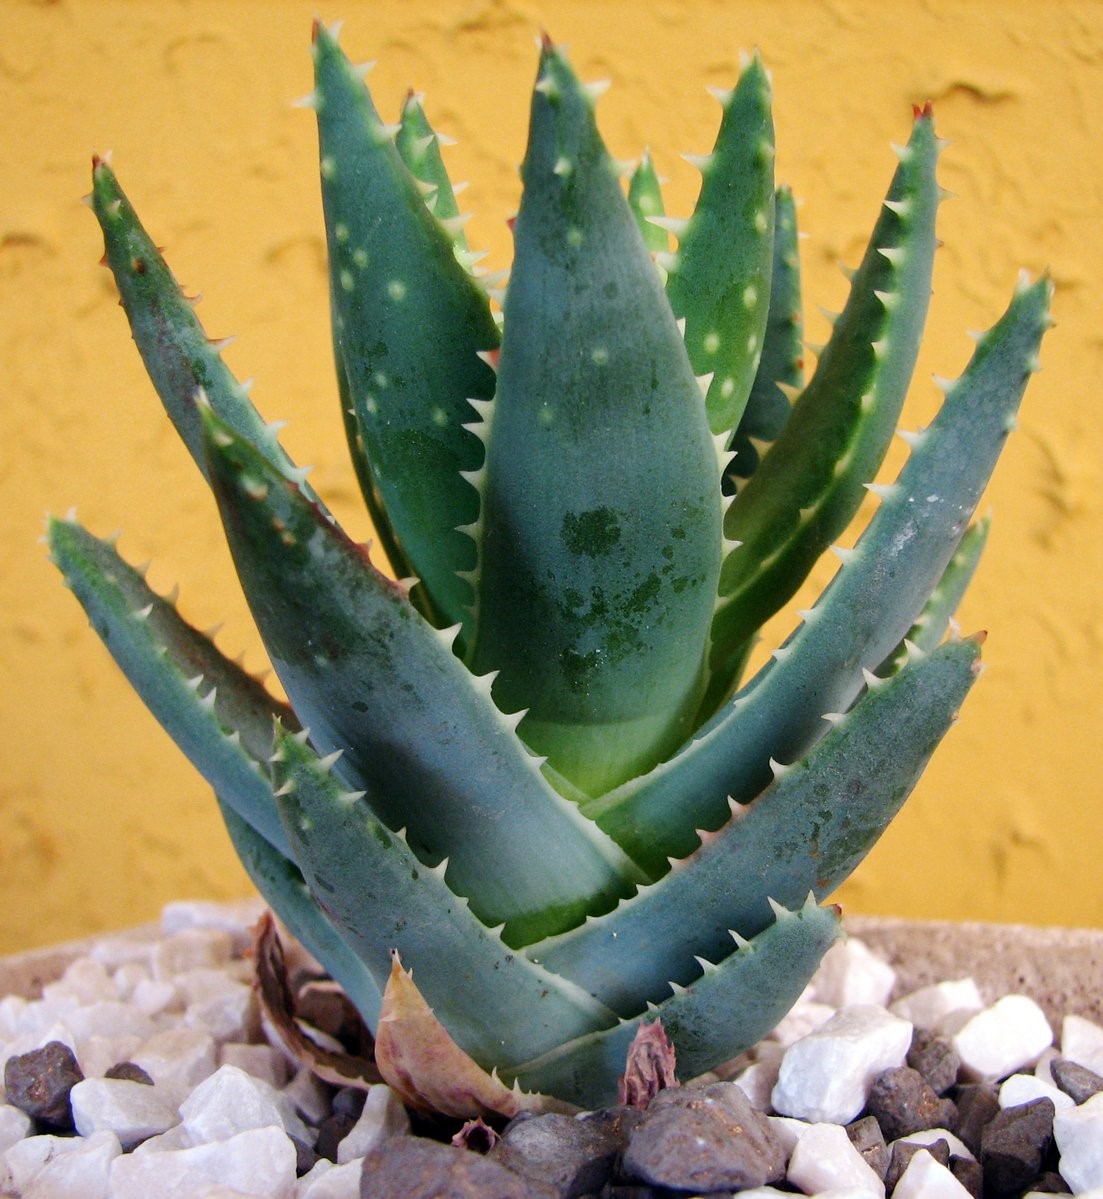 aloe vera benefits - What are the benefits of aloe vera gel juice - what is aloe vera good for